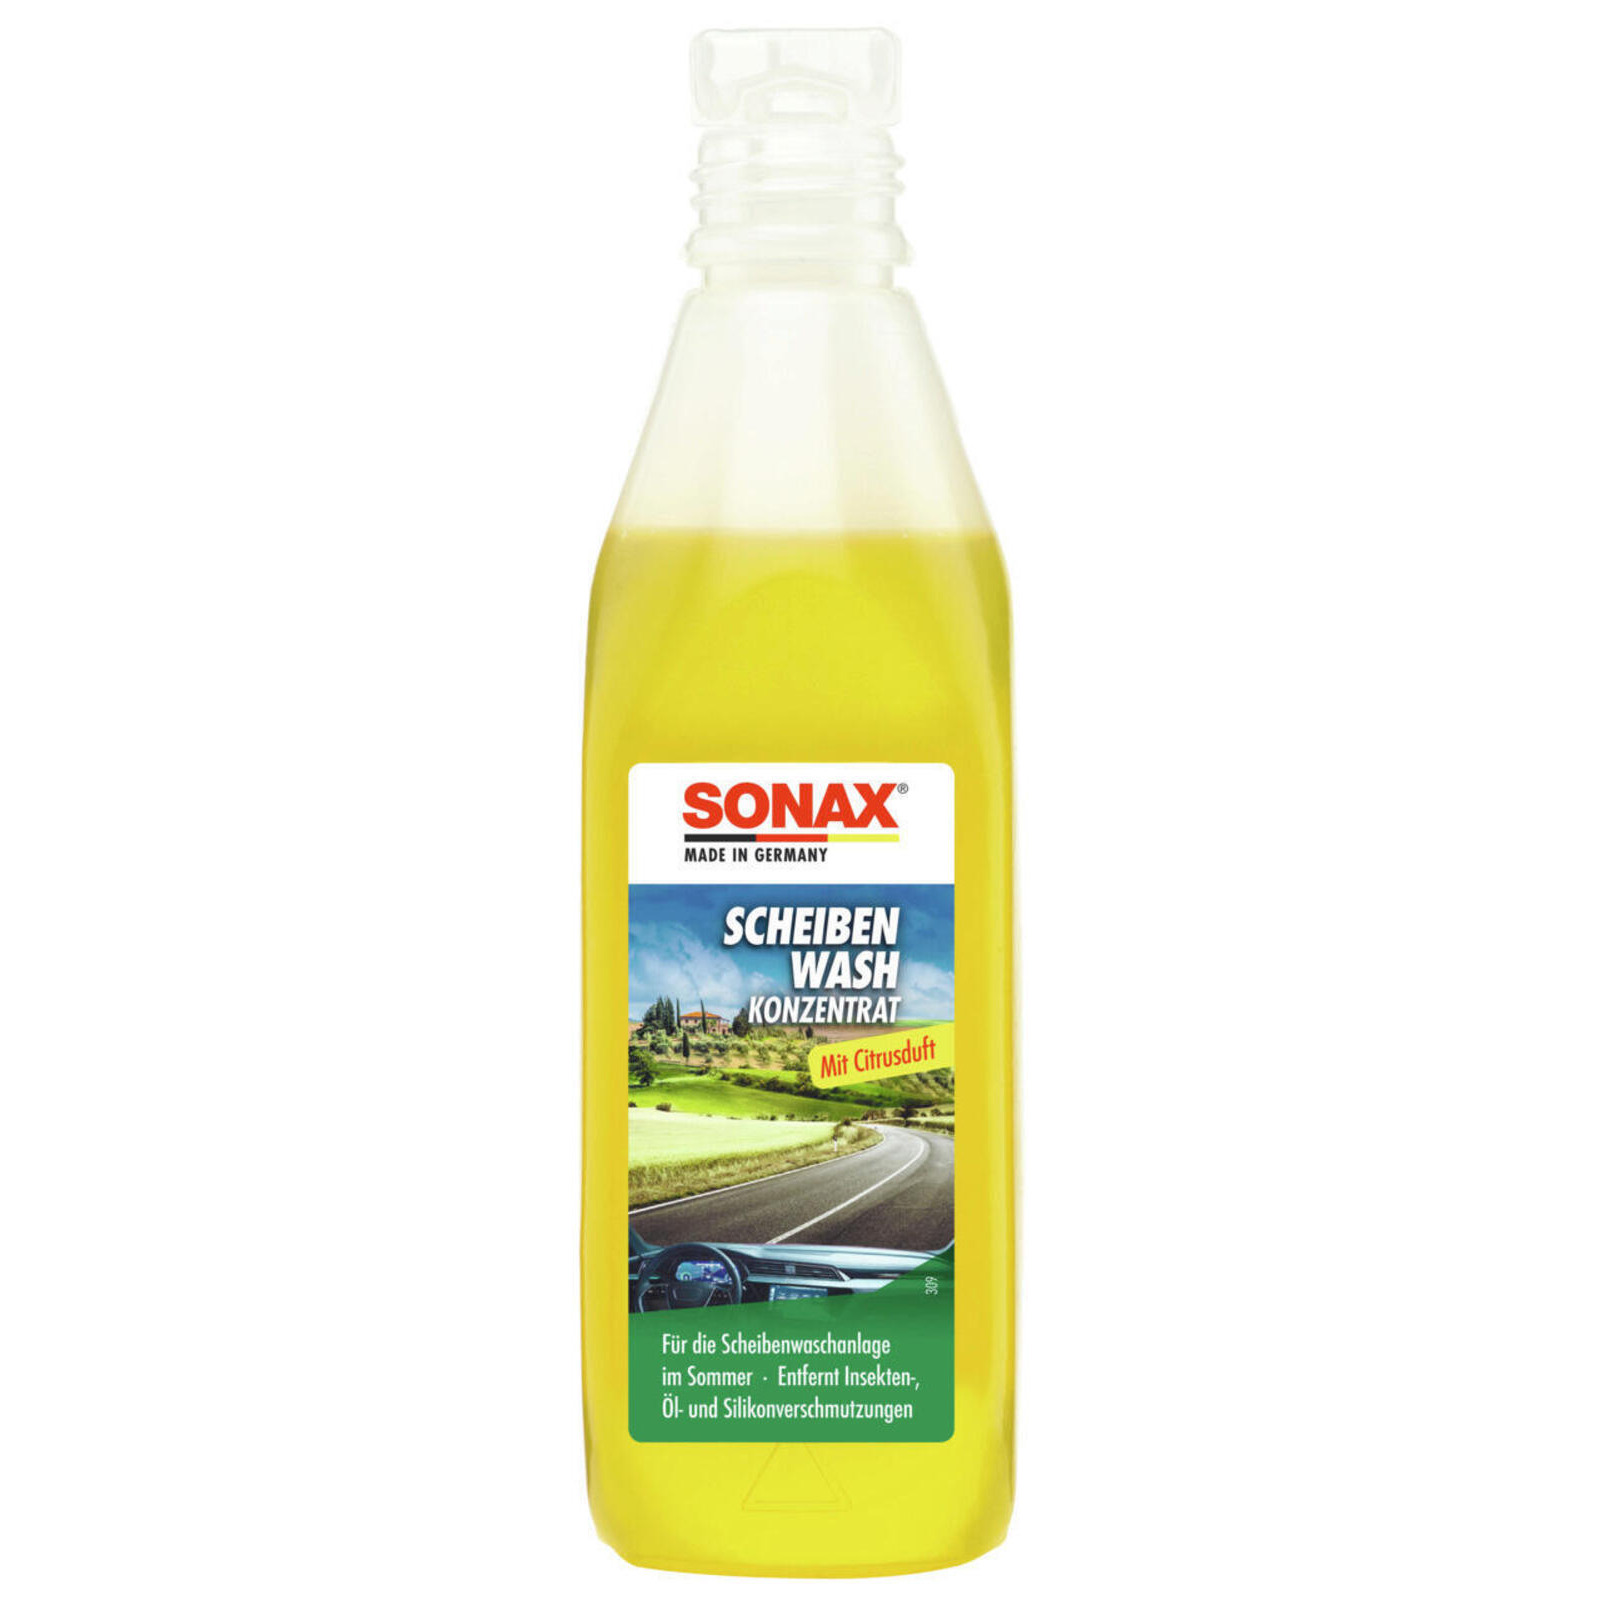 SONAX Cleaner, window cleaning system Windscreen wash Concentrate 1:10 citrus